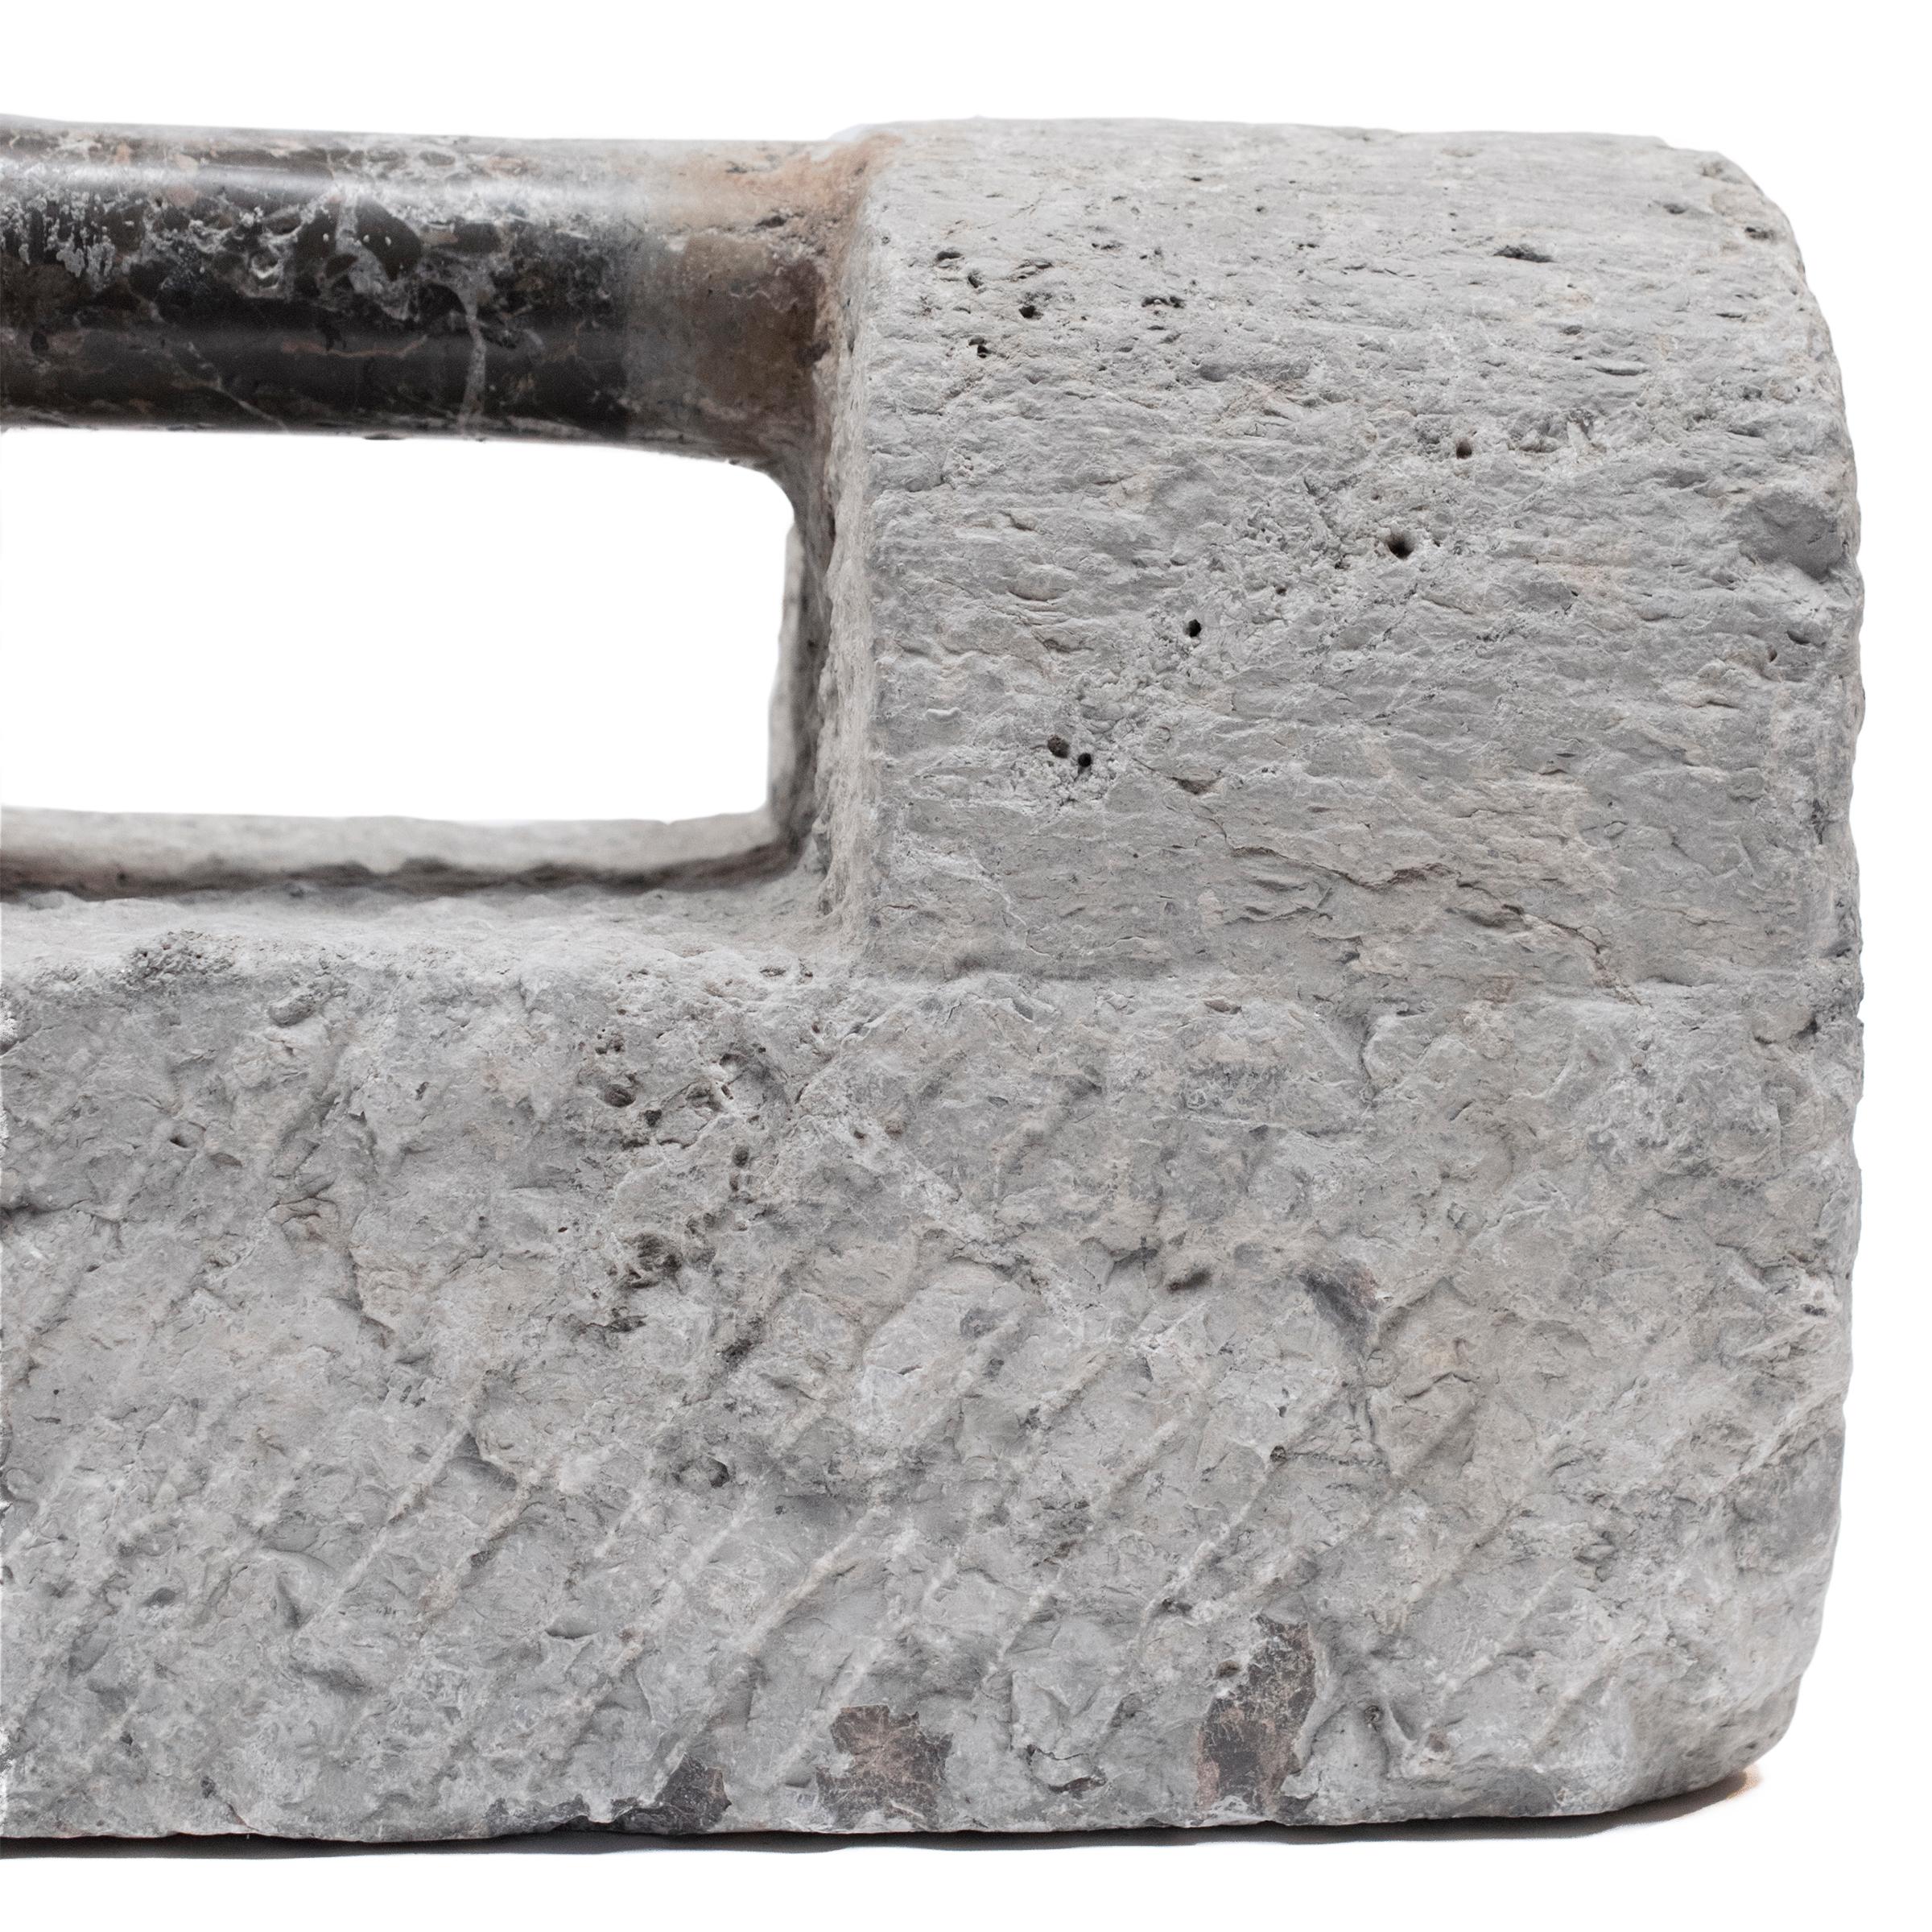 Used in intensive martial arts training, training weights such as this one made of limestone were shaped like ancient Chinese locks but were used much like modern dumbbells. Students would grip the handle and either swing the weight around or use